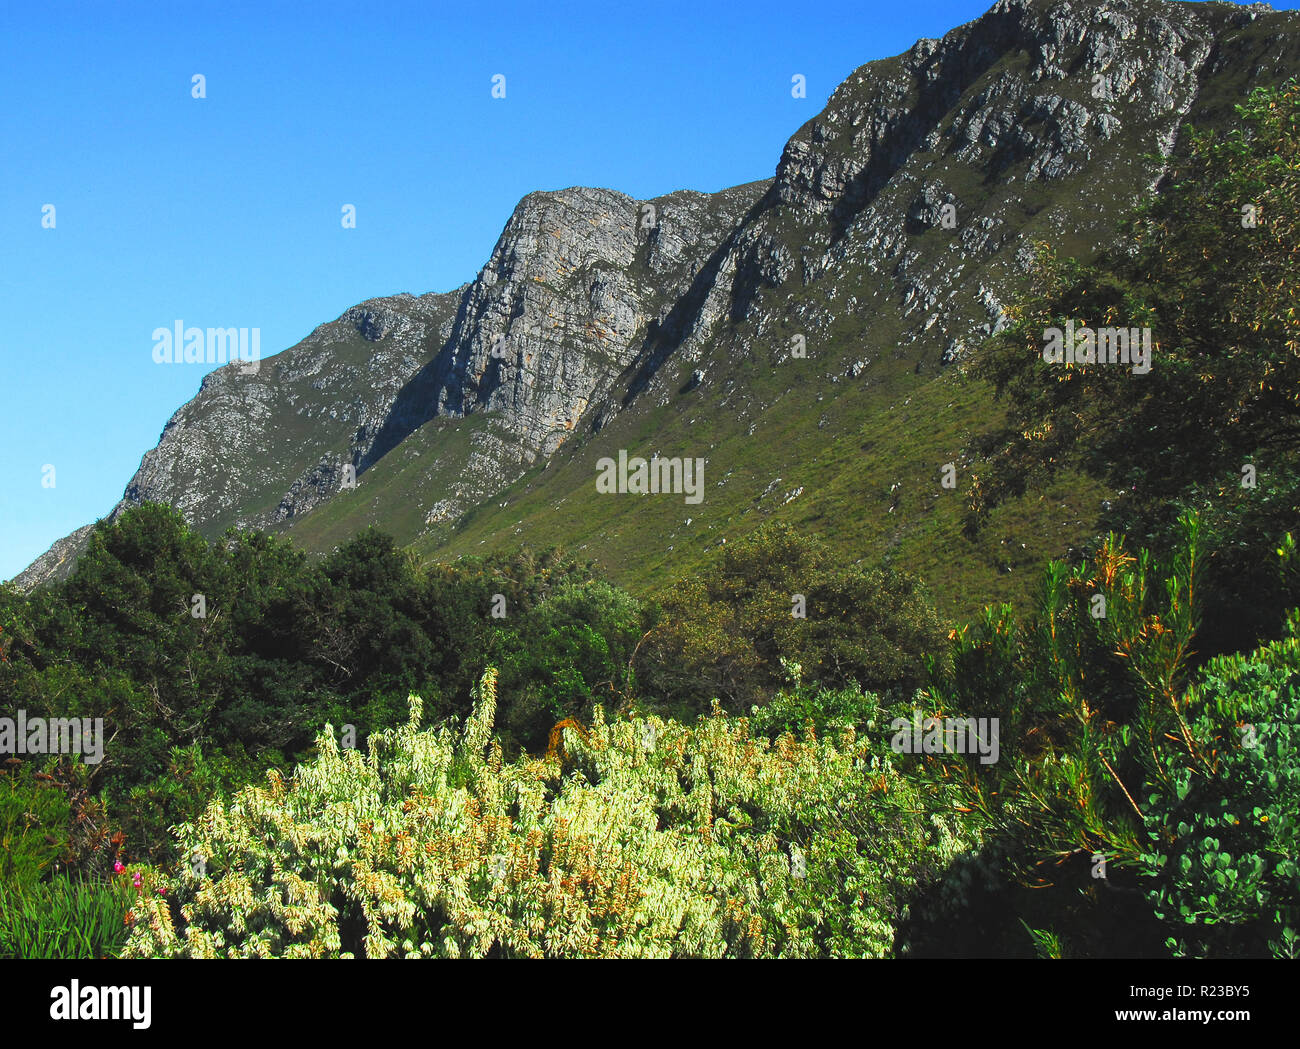 A beautiful landscape view of the mountains surrounding the Harold Porter Nation Botanical Gardens near Cape Town, South Africa. Stock Photo